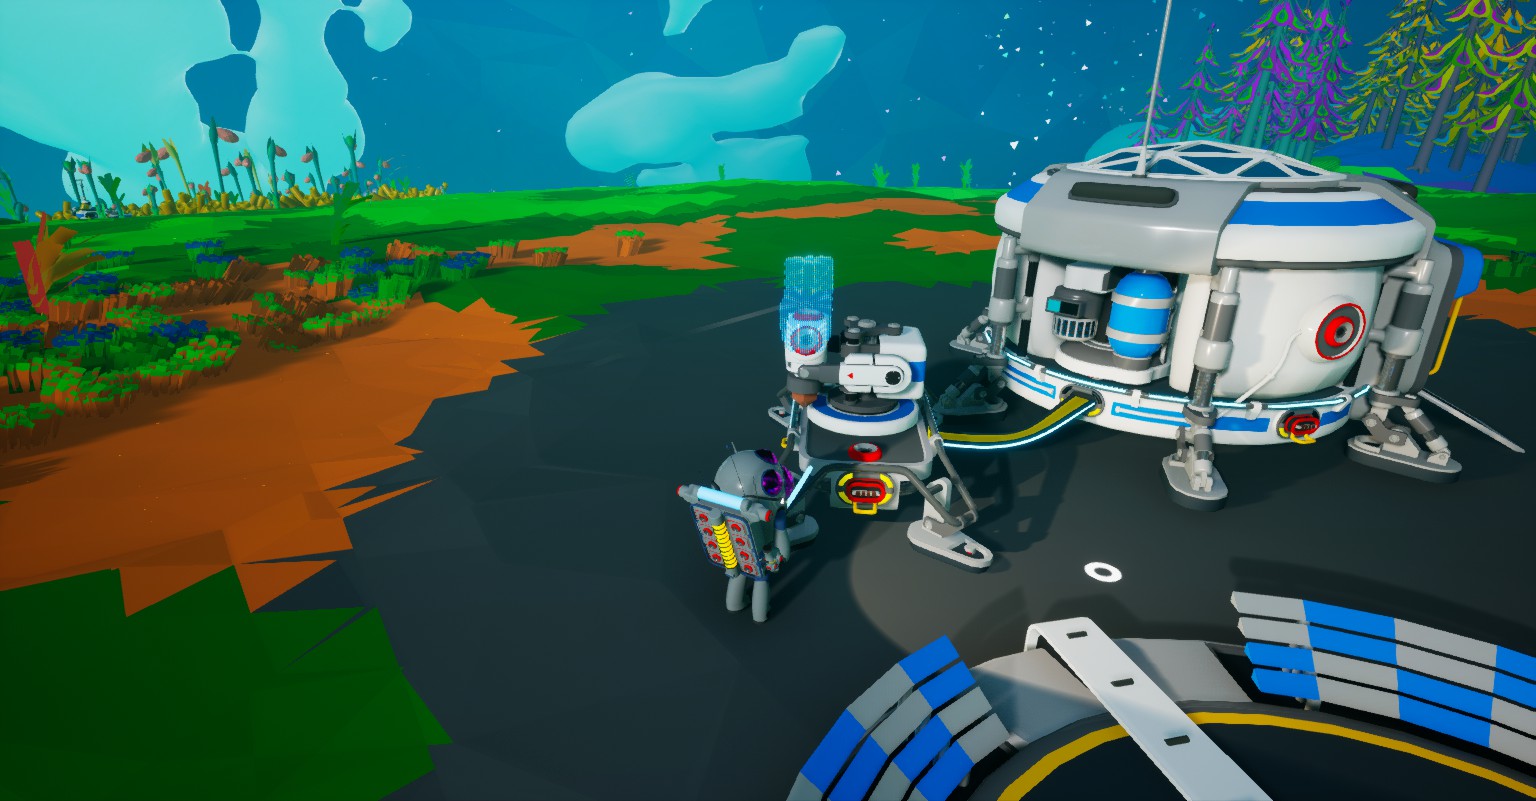 Steam :: :: ASTRONEER Advanced Up to Date (10/1/2019)